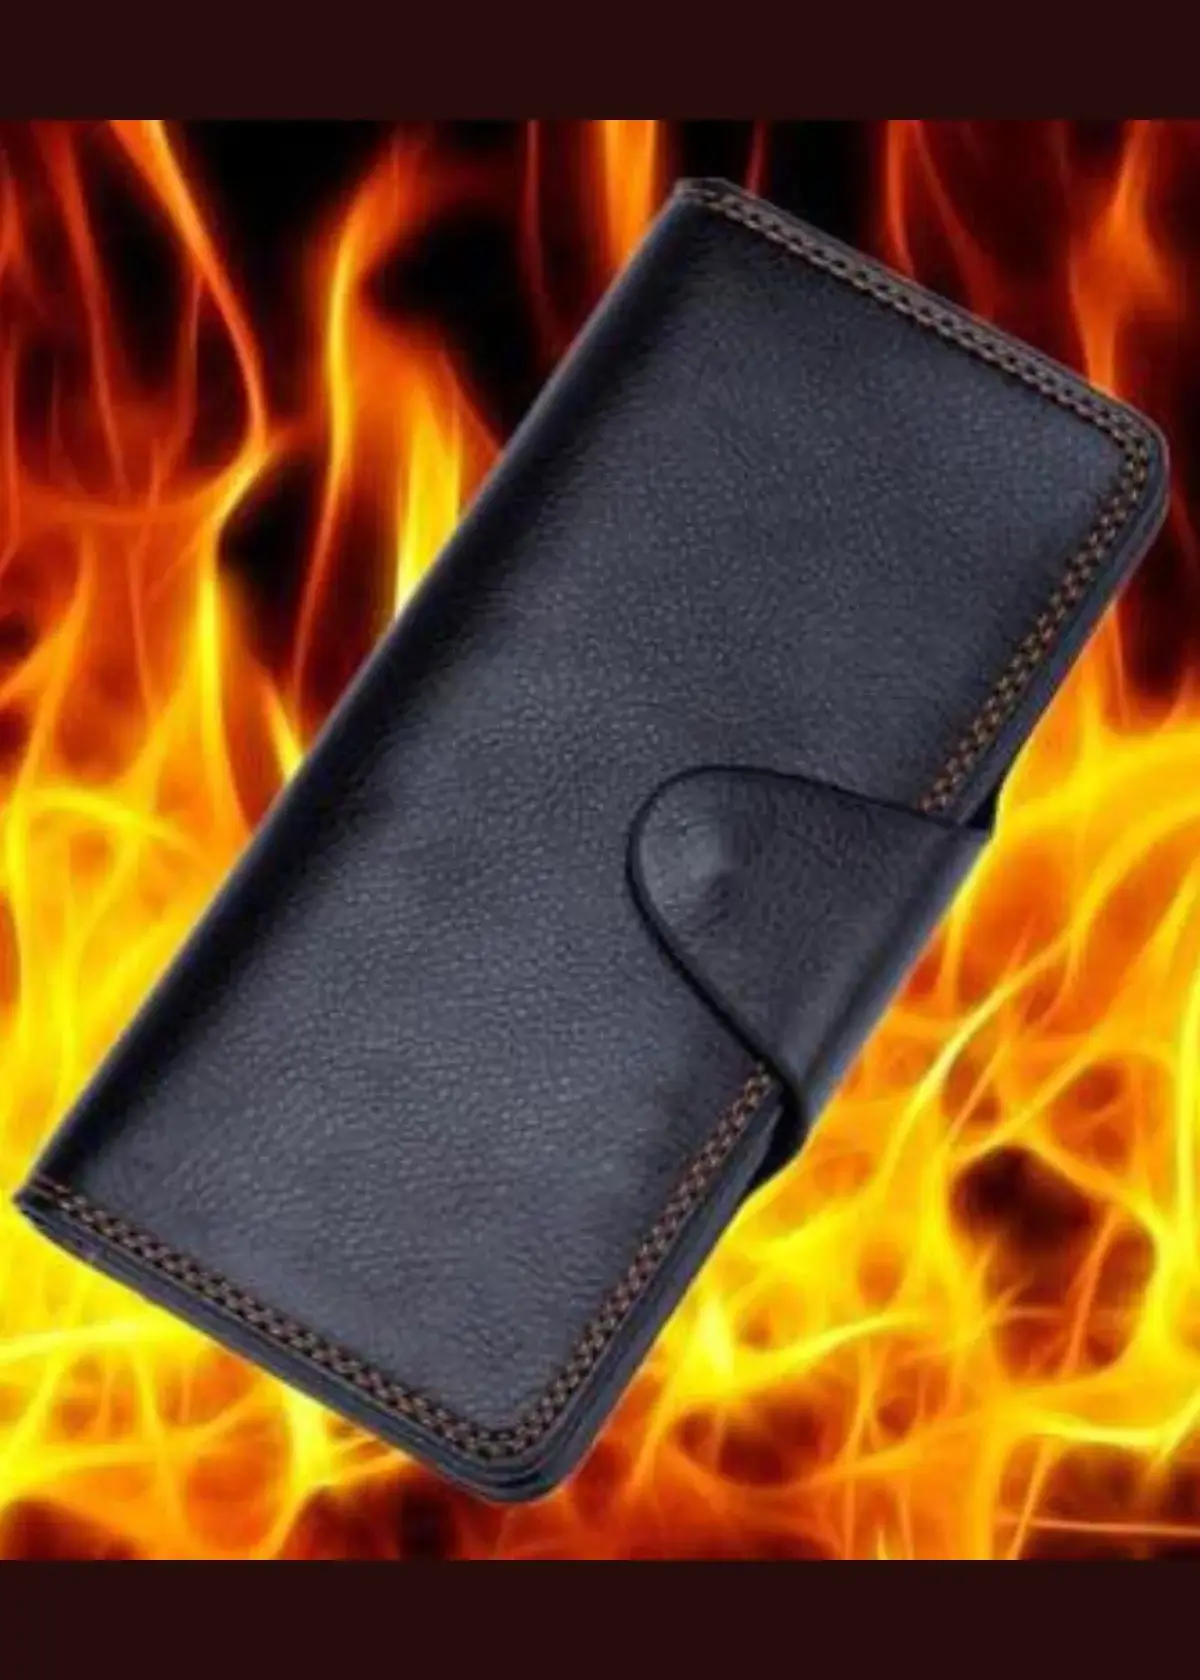 How does a fire wallet work?